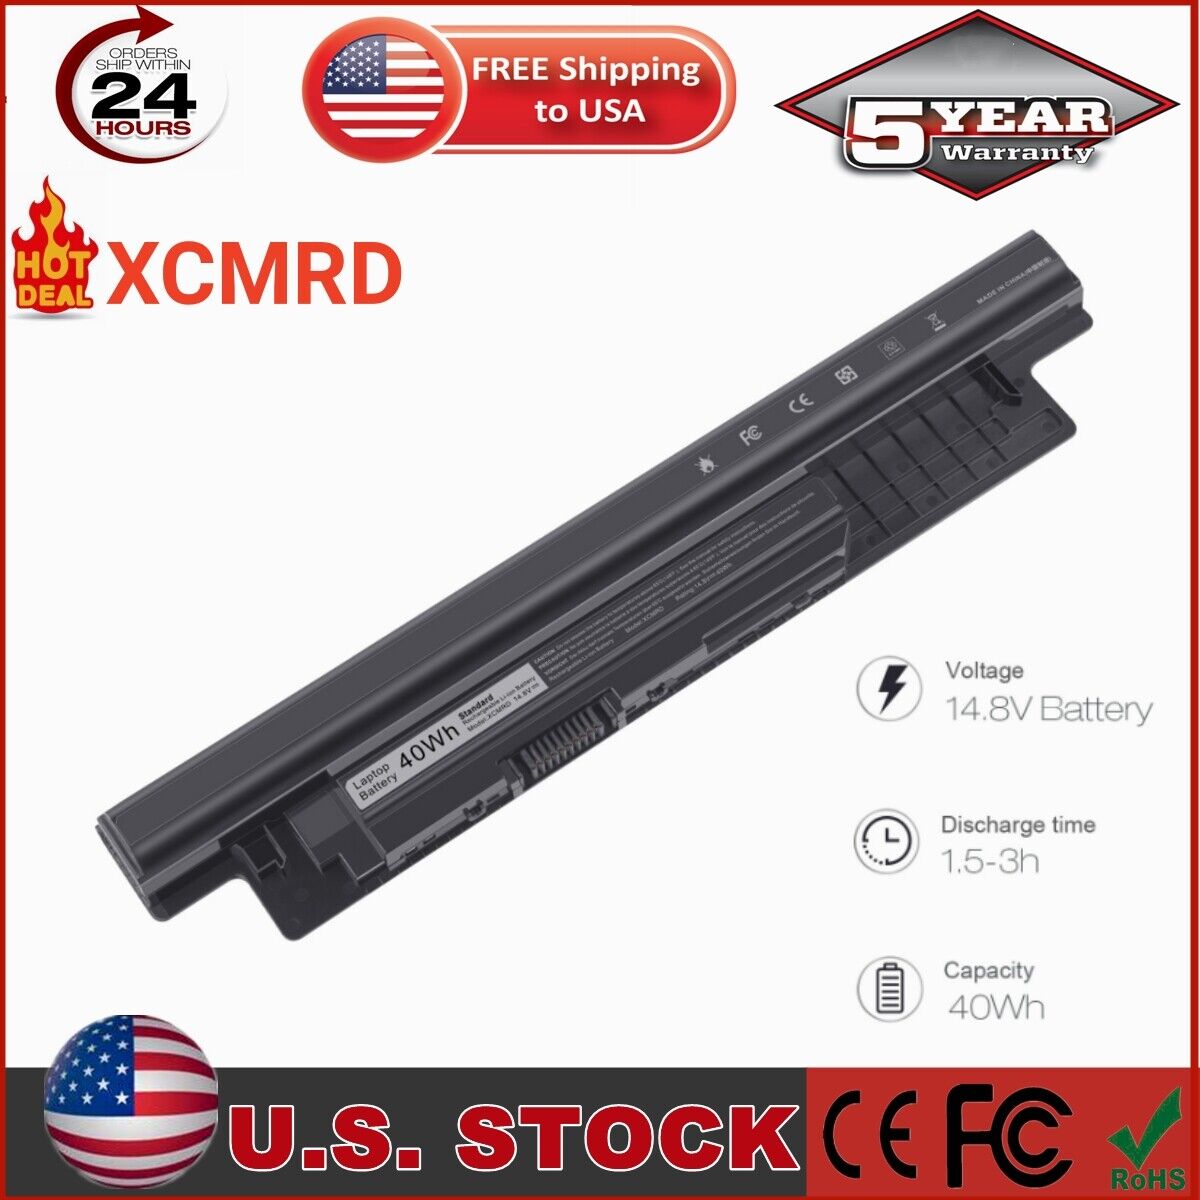 40Wh Battery For DELL INSPIRON 3541 3521 3721 5537 5749 5748 312-1392 Type XCMRD